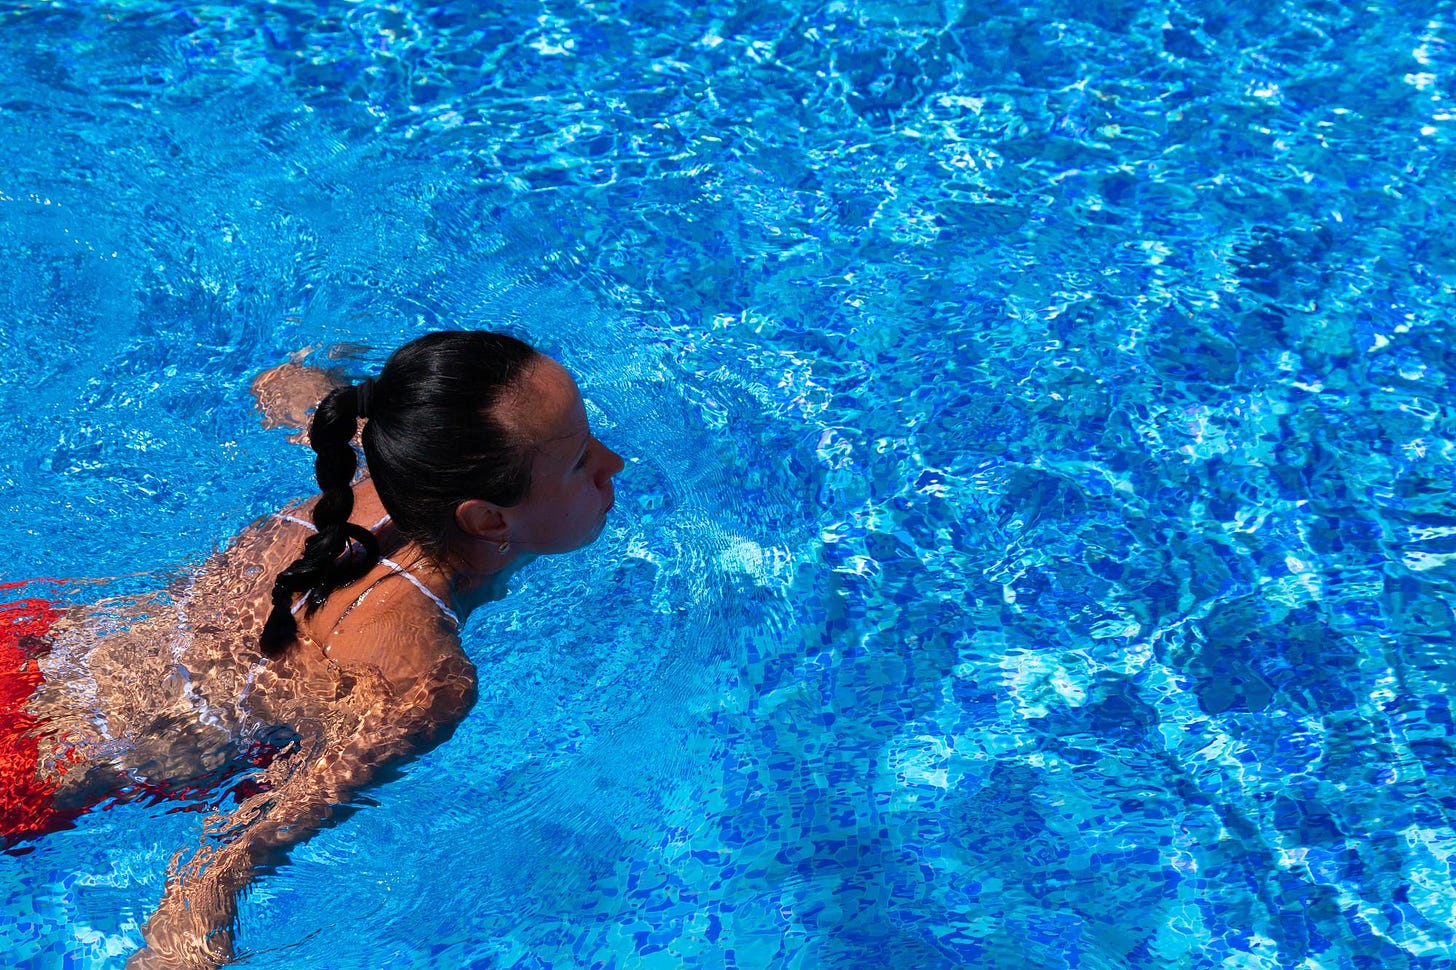 Tanned female swimming in outdoor pool.